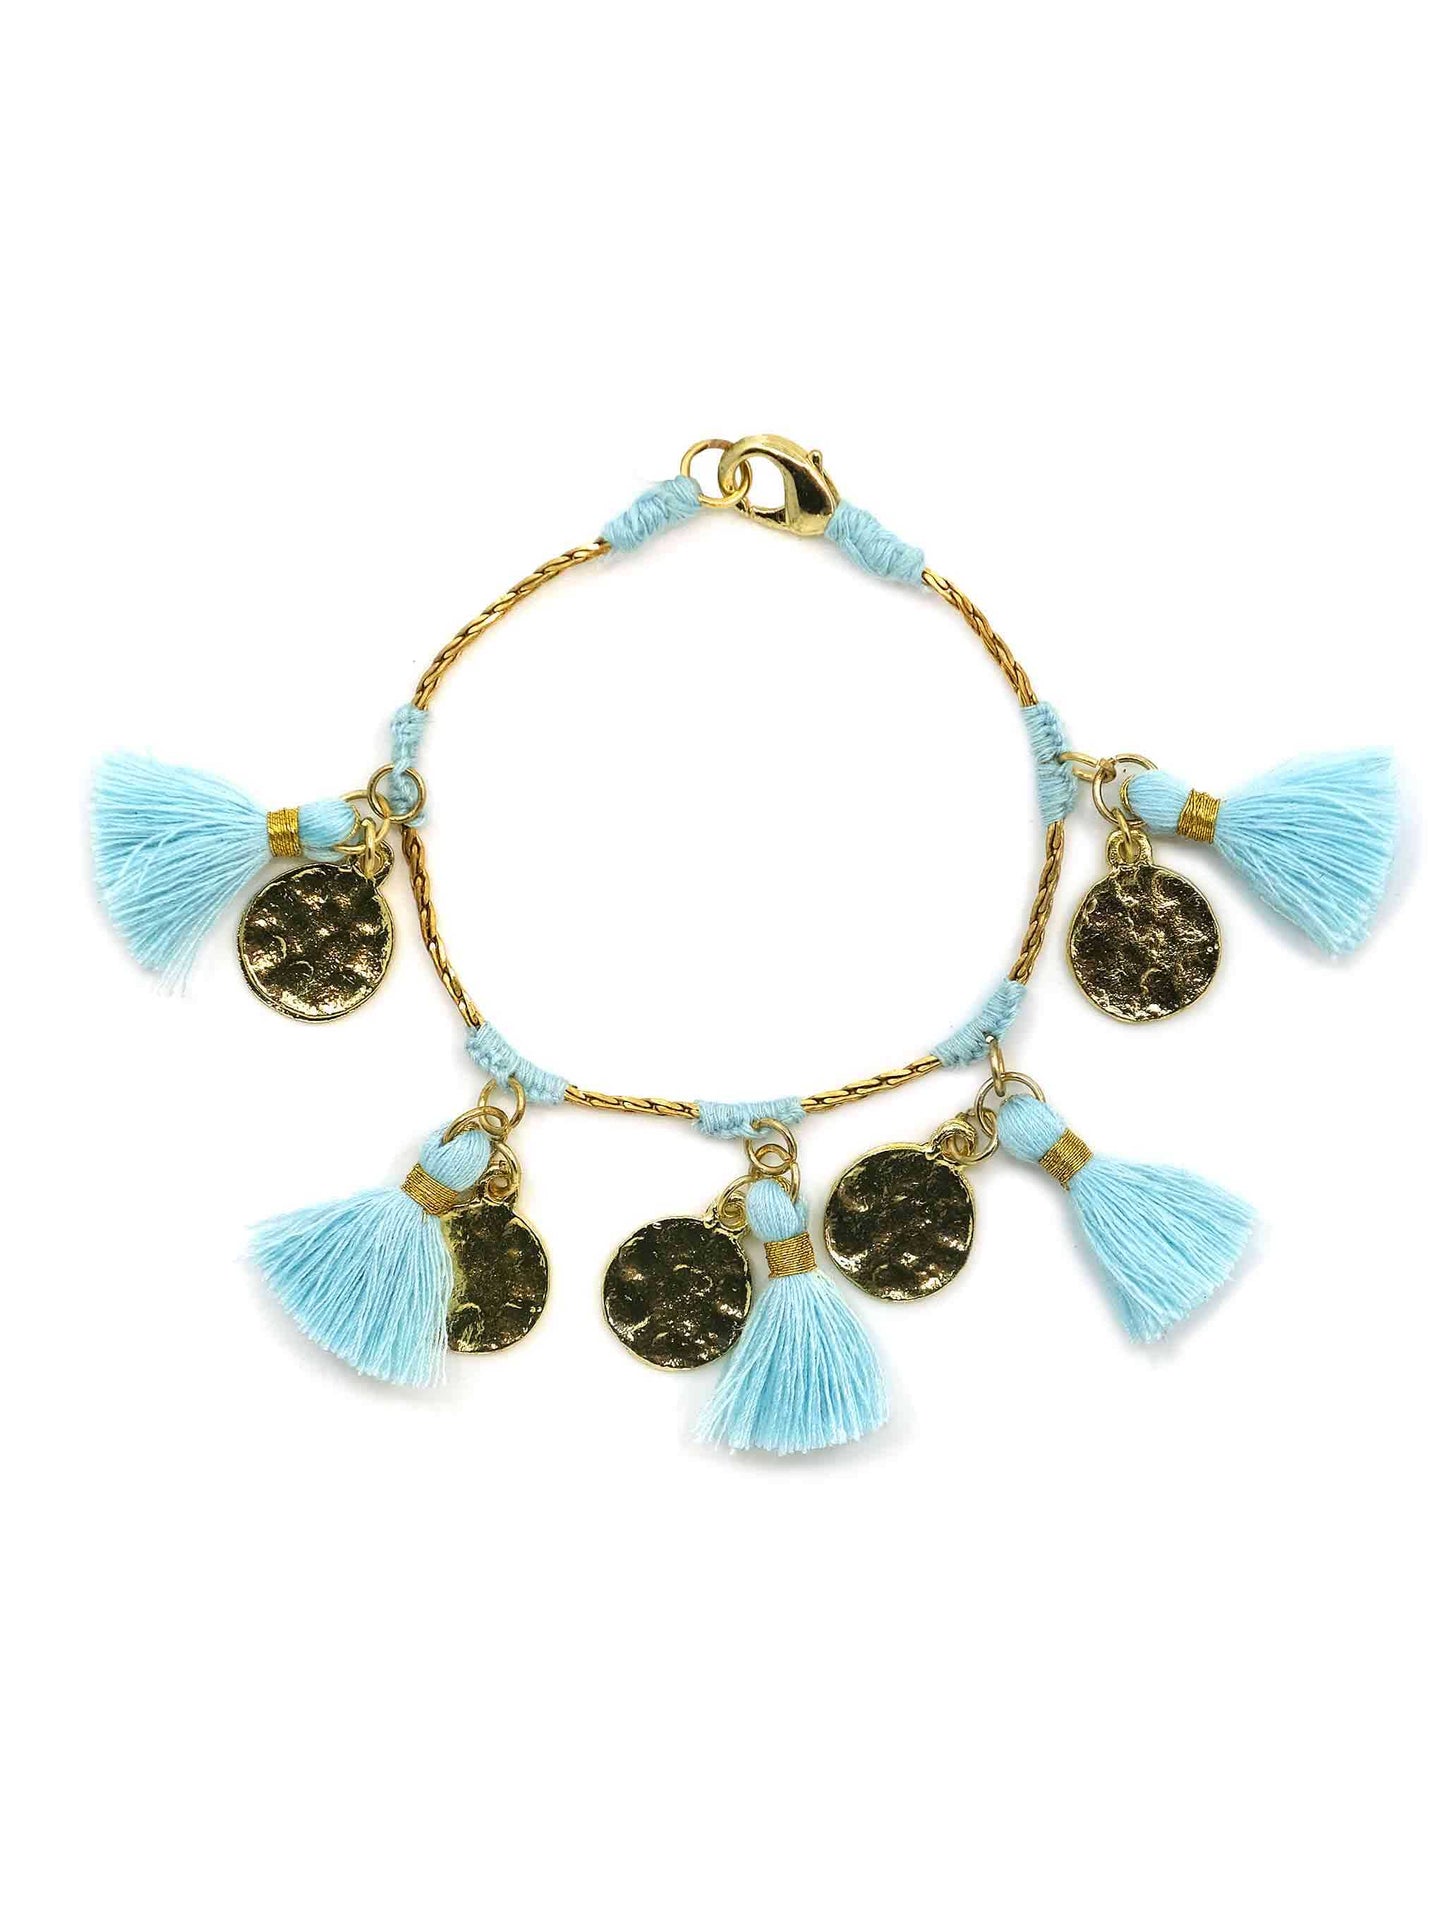 Bohemian glam in gold and candy blue fringe bracelet with stylish coin detailing.